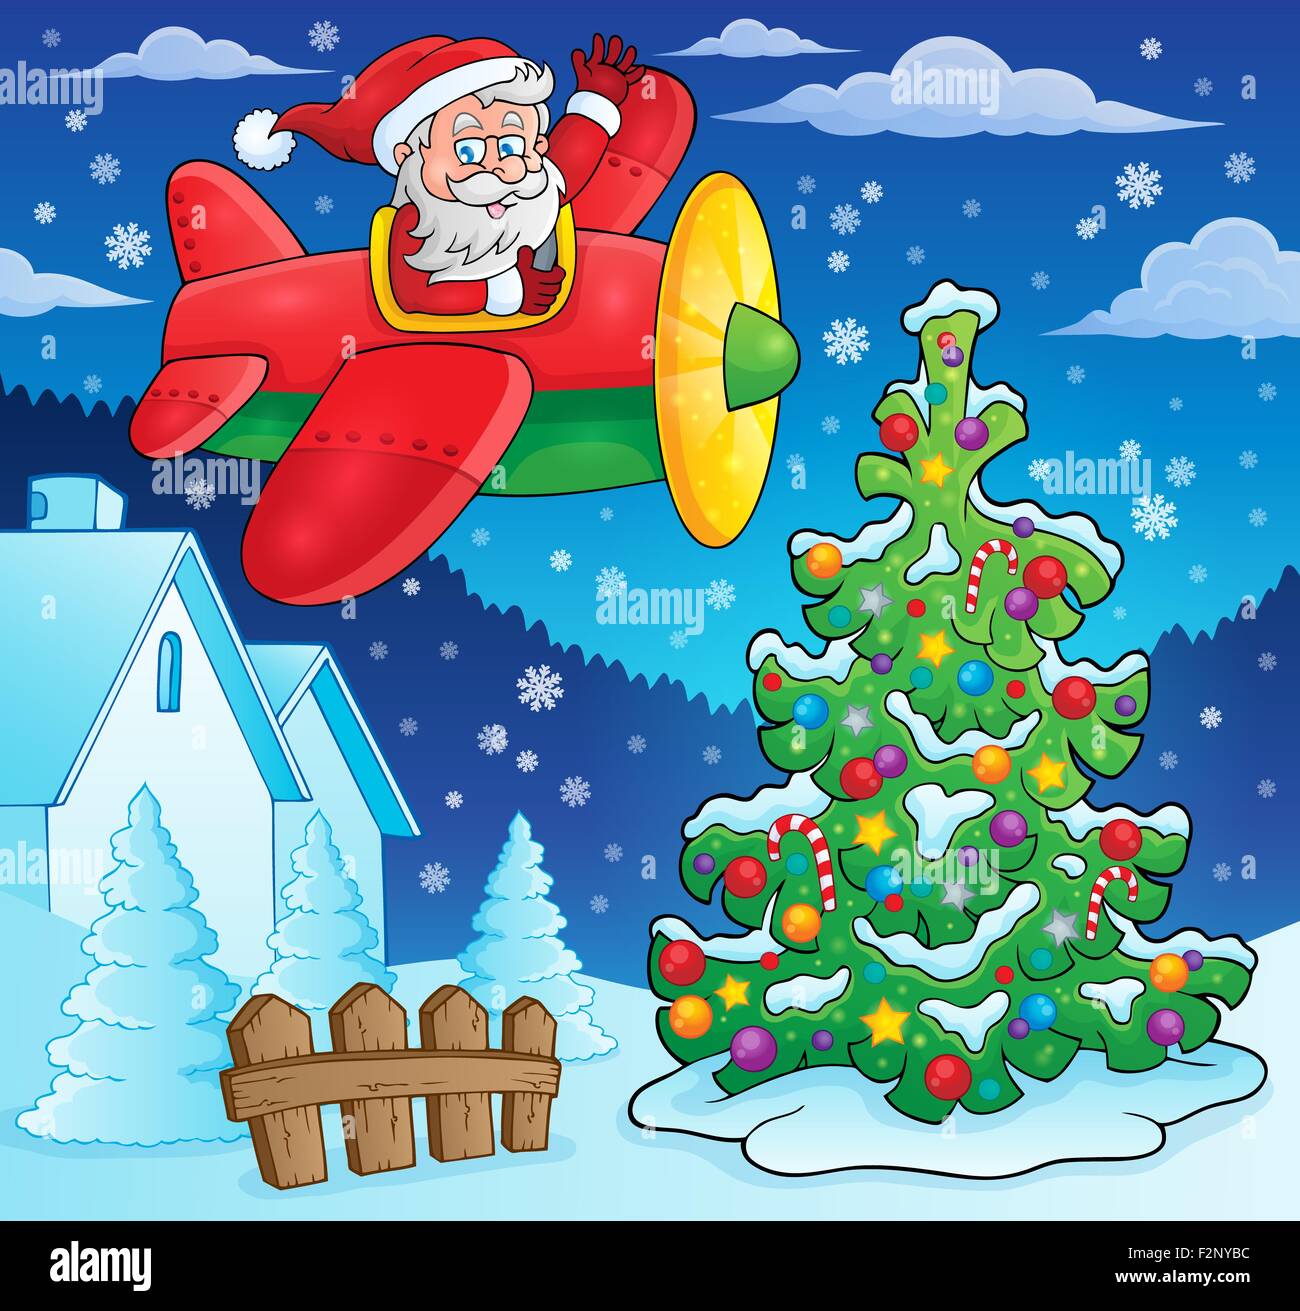 Christmas theme Santa Claus in plane picture illustration Stock Image